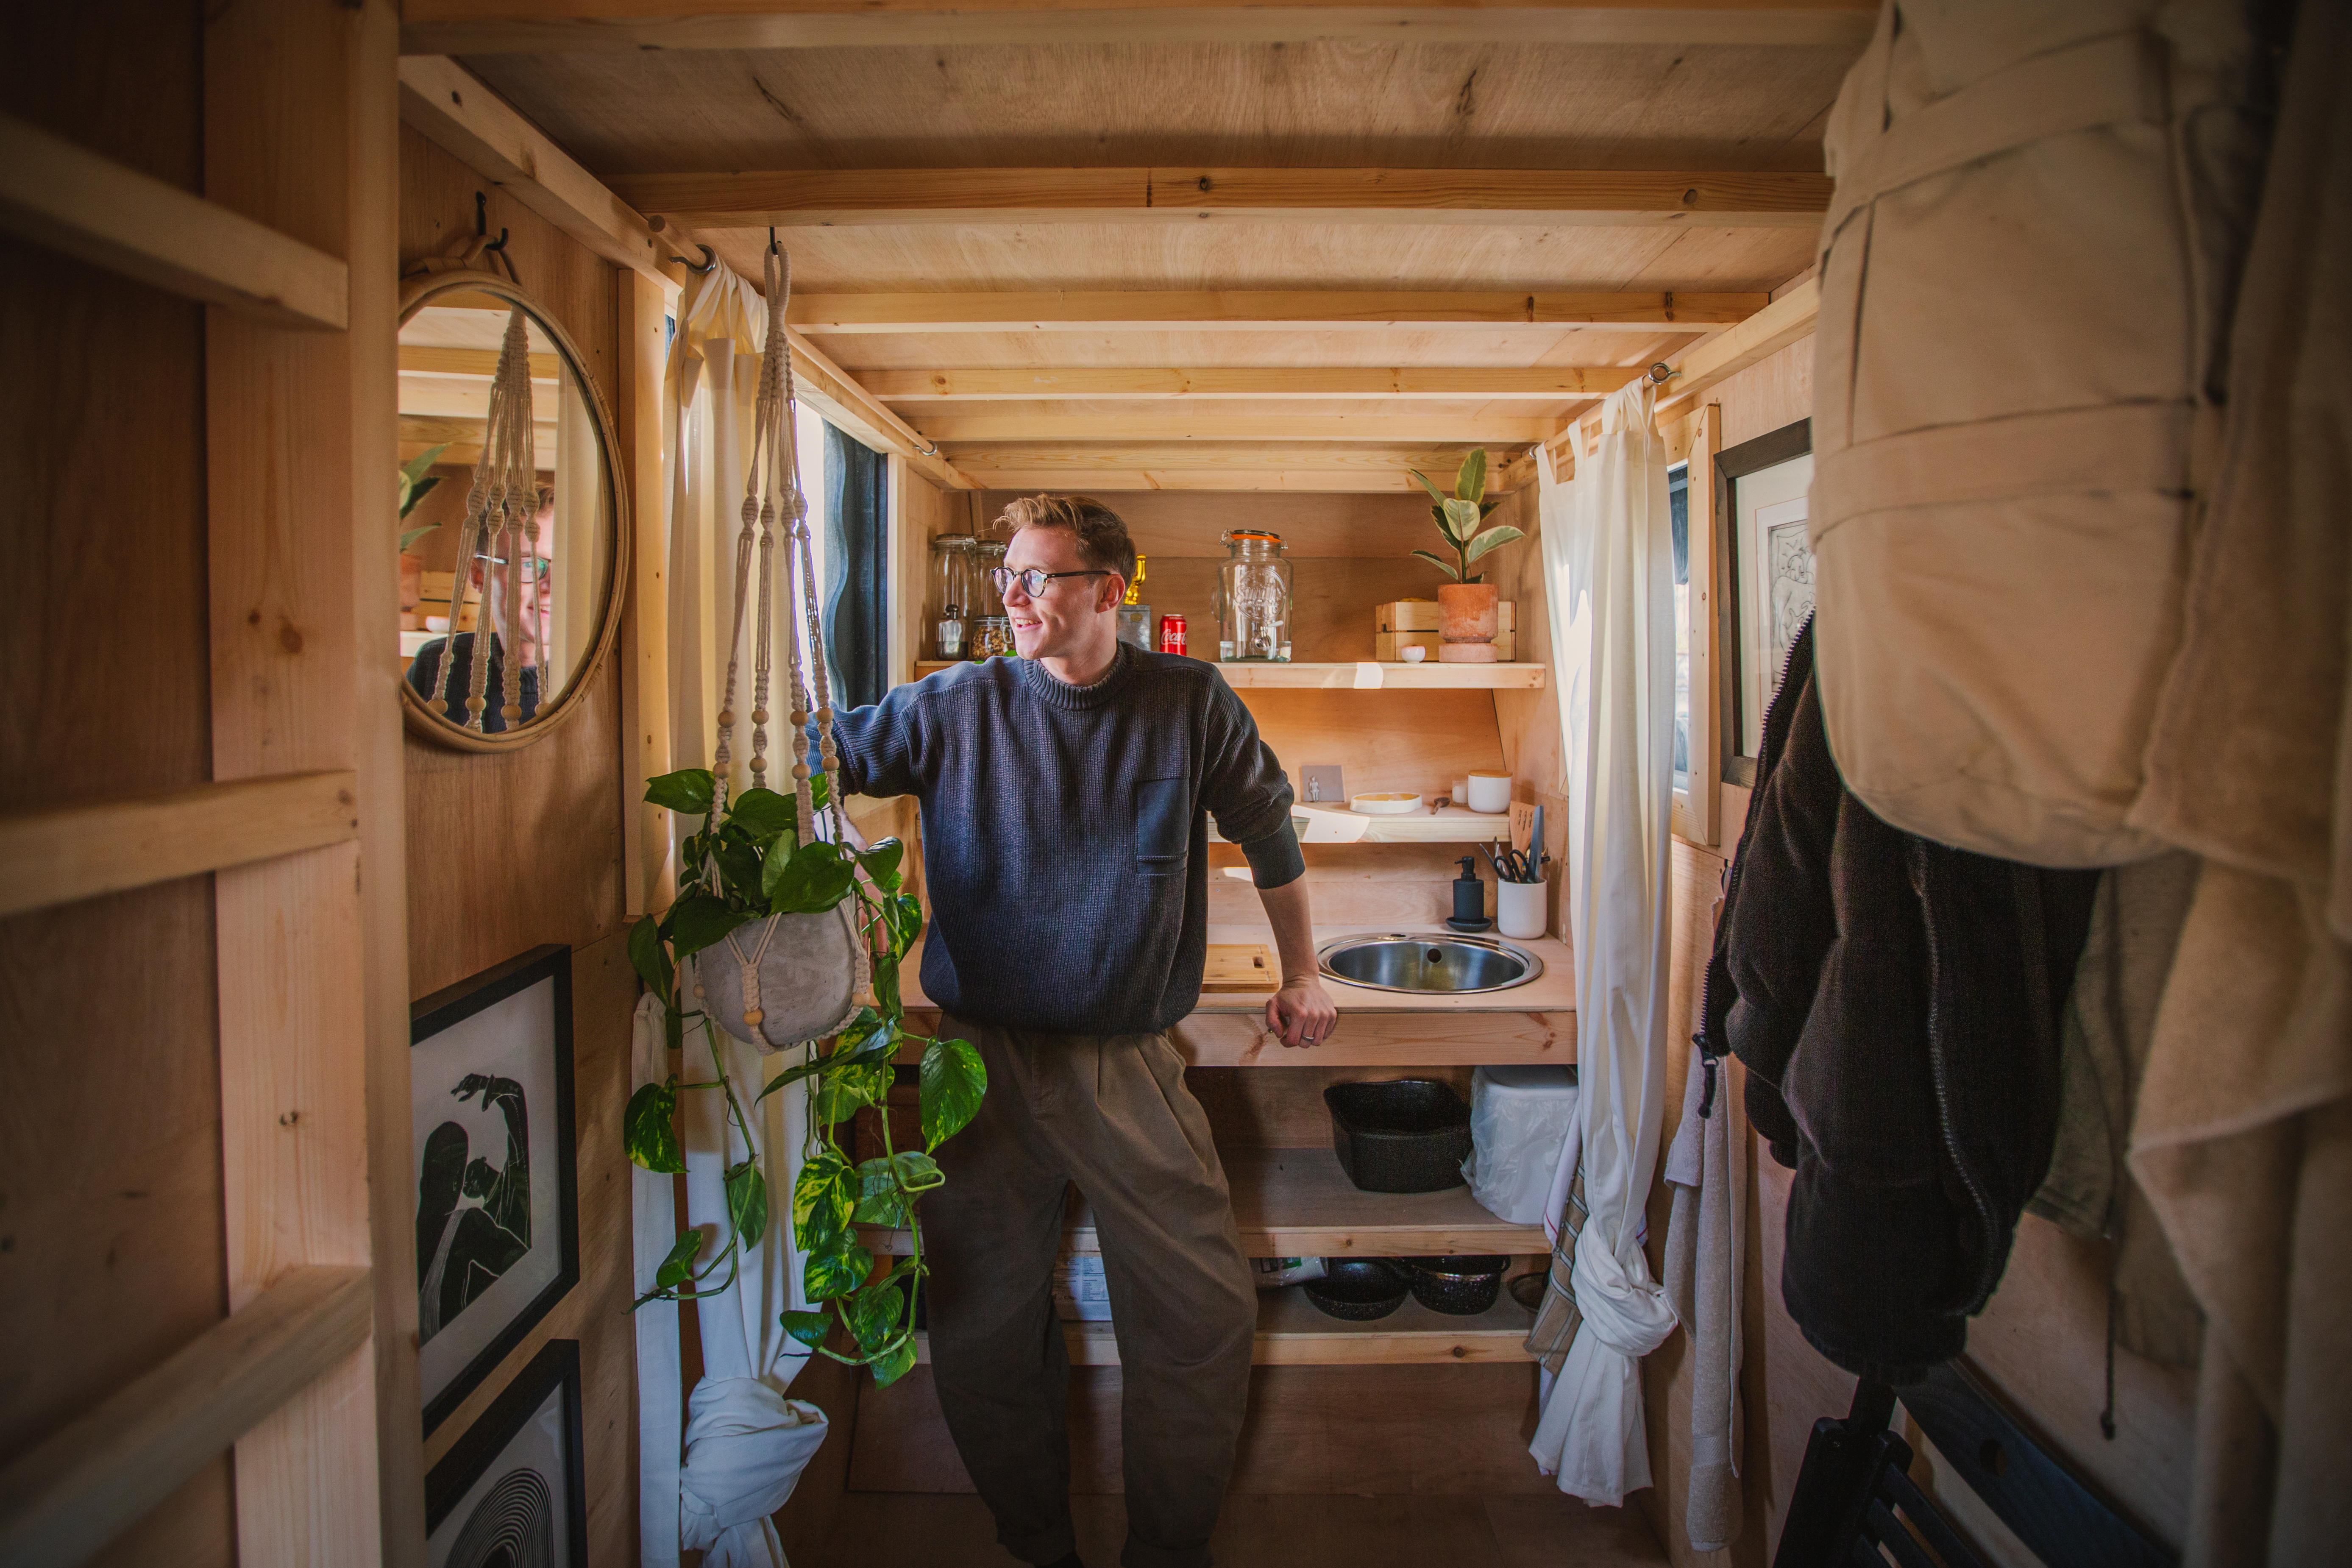 Harrison Marshall, a 28-year-old artist, is aiming to live in his skip for a year